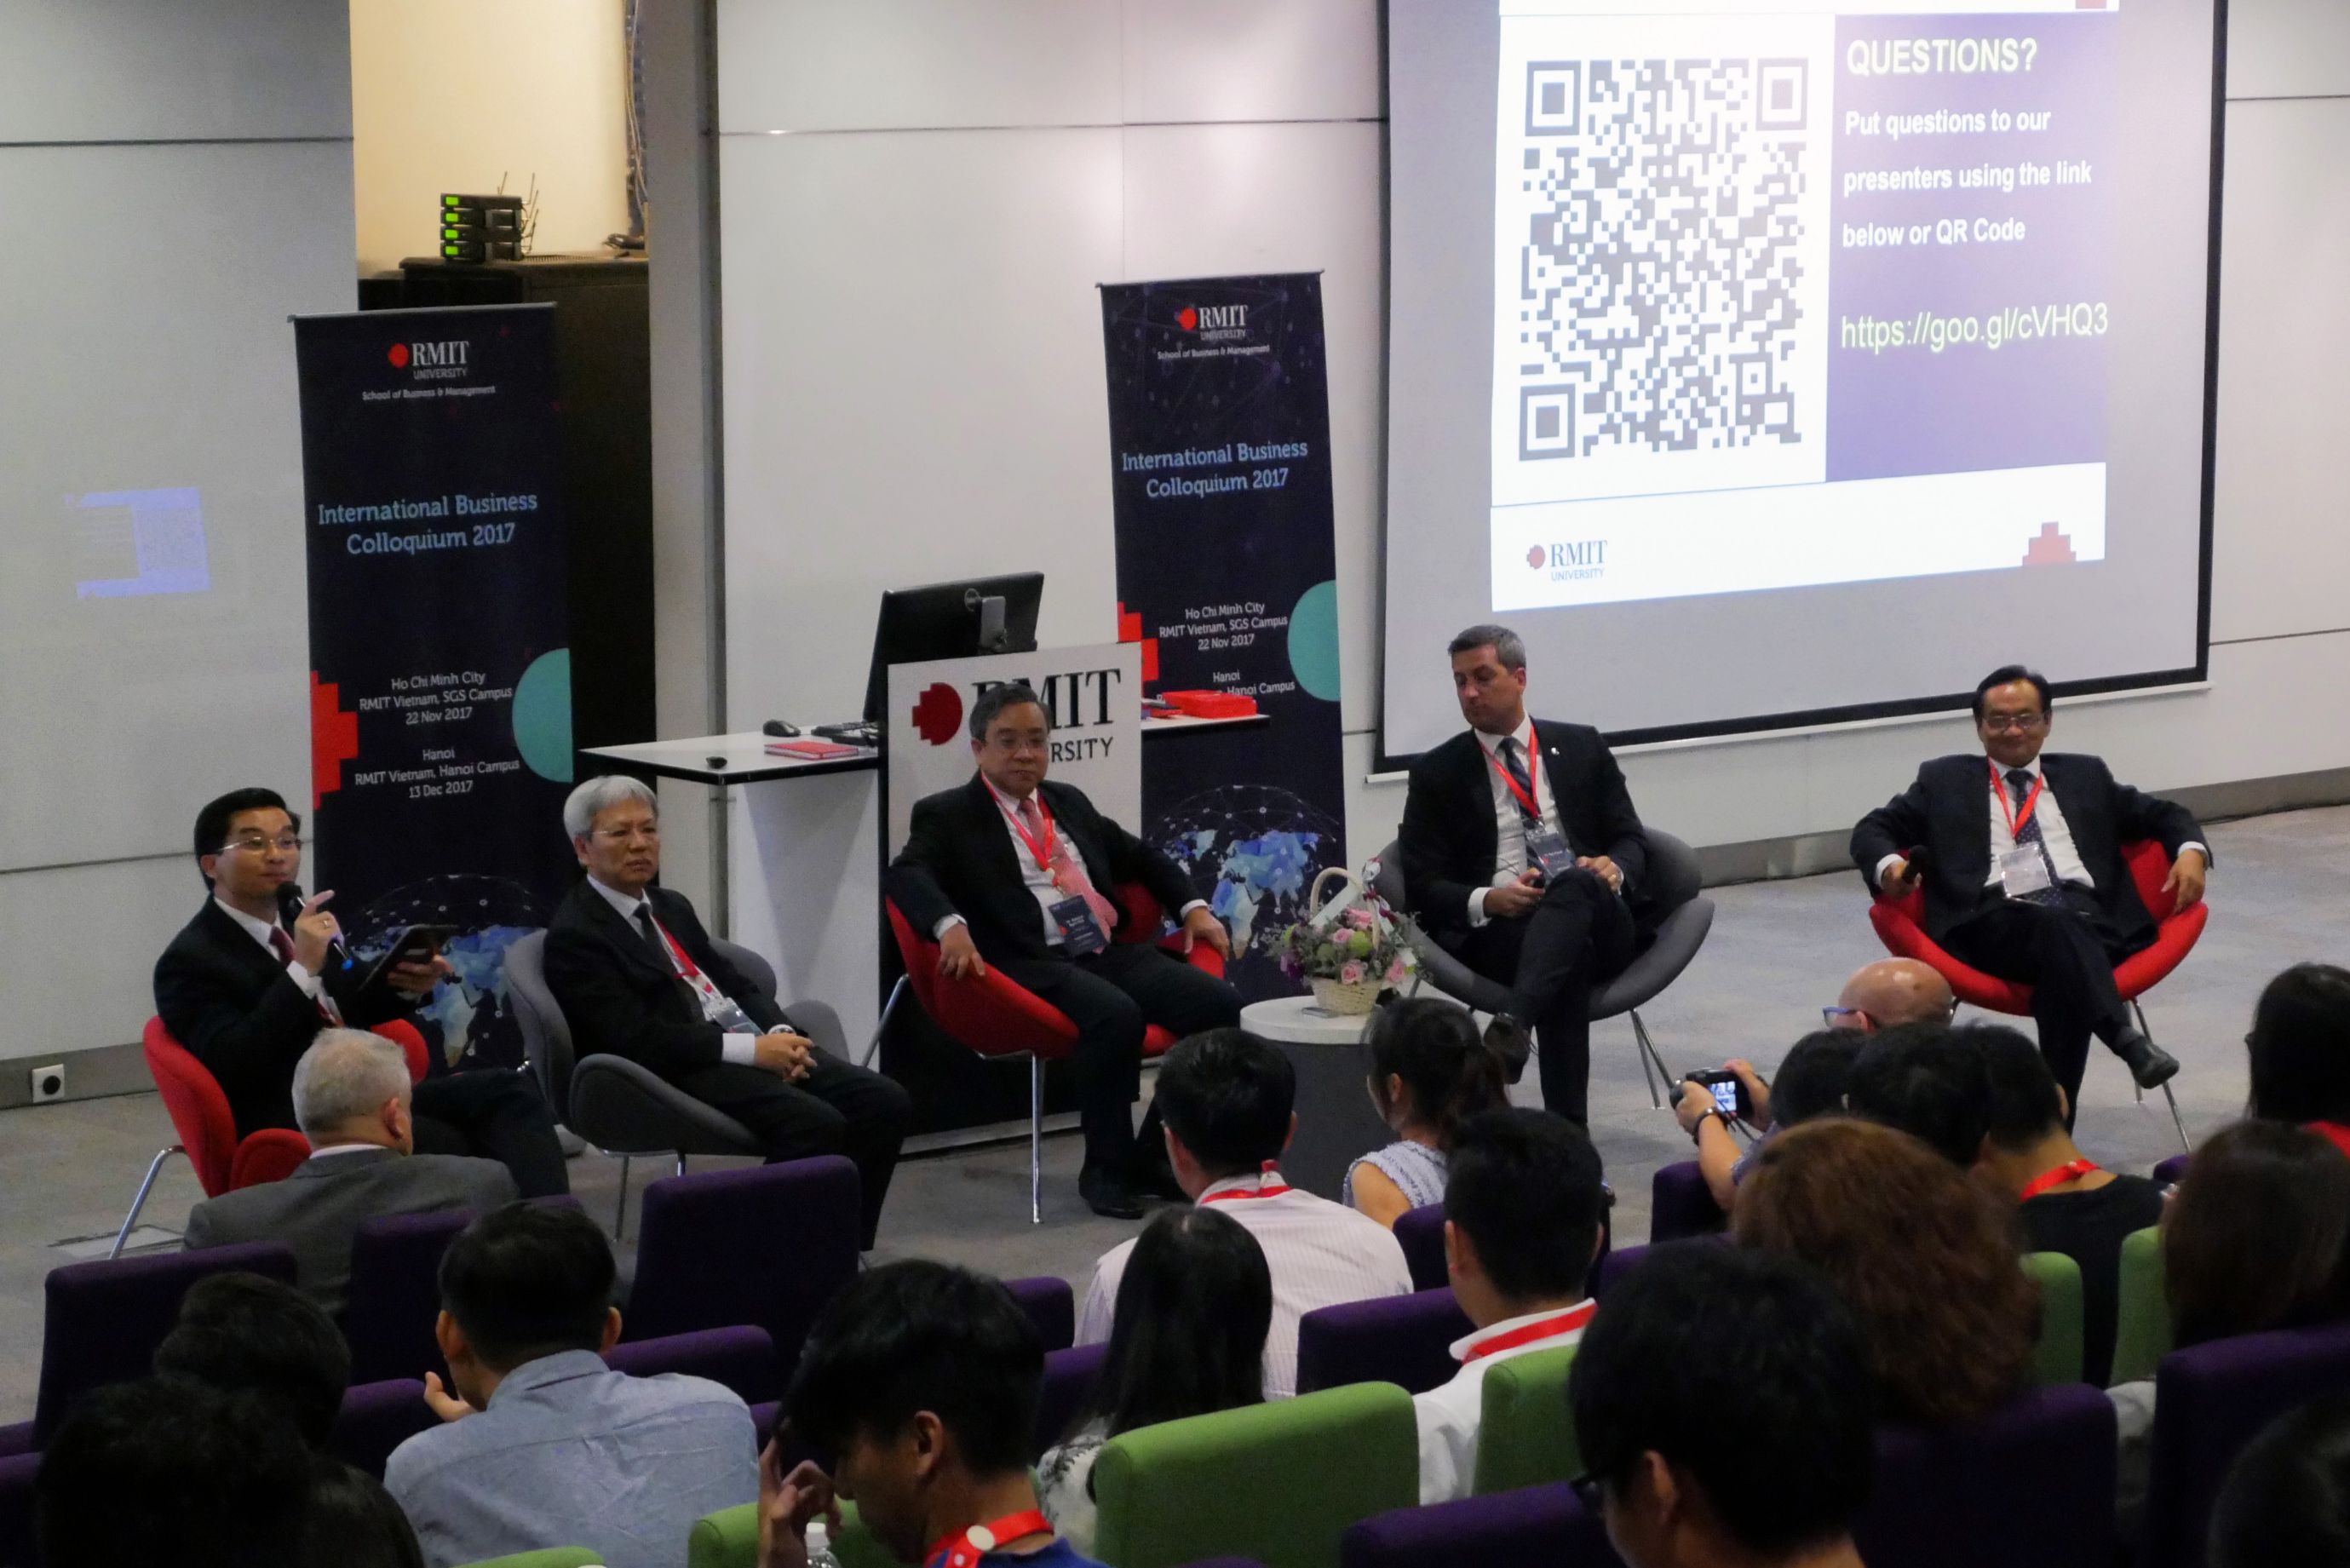 Panel discussion on roadmap for success in international business